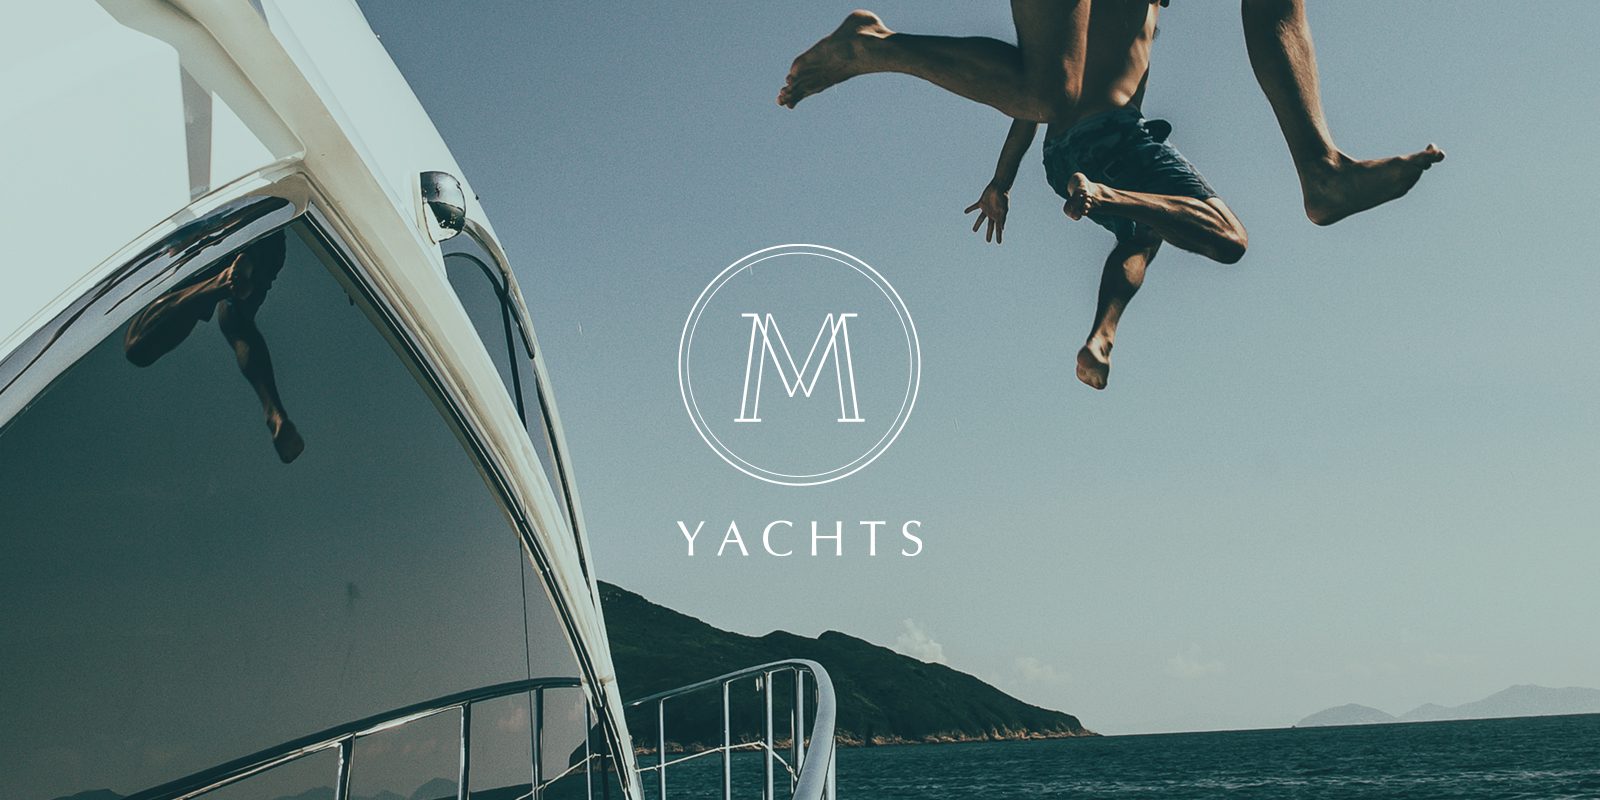 M Yachts Branding Happy People Jumping Off From The Boat To The Sea Water 1